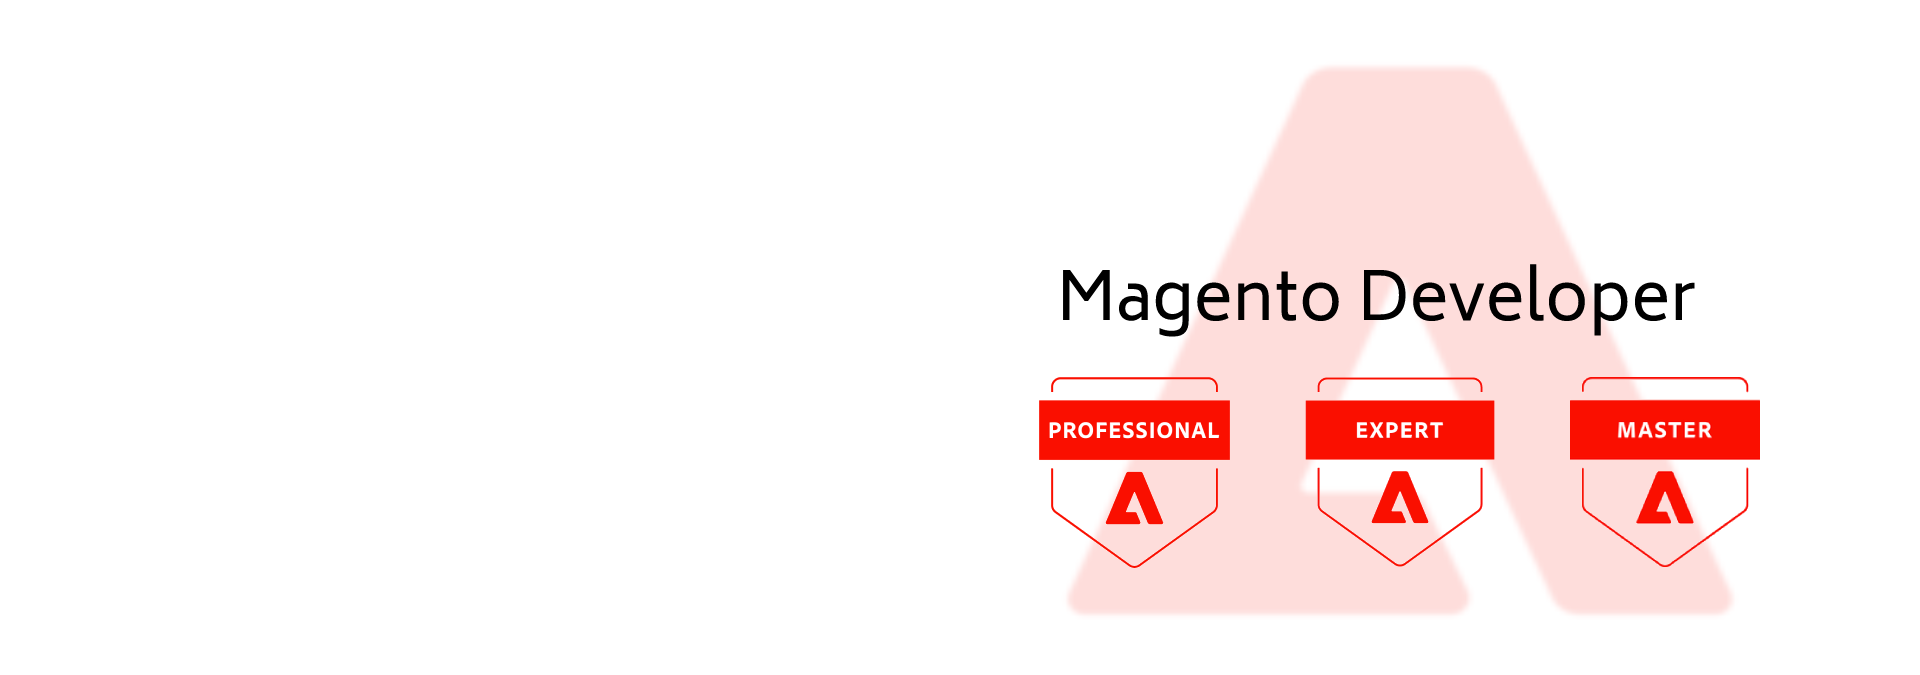 Top Skills a Magento Developer Must Have